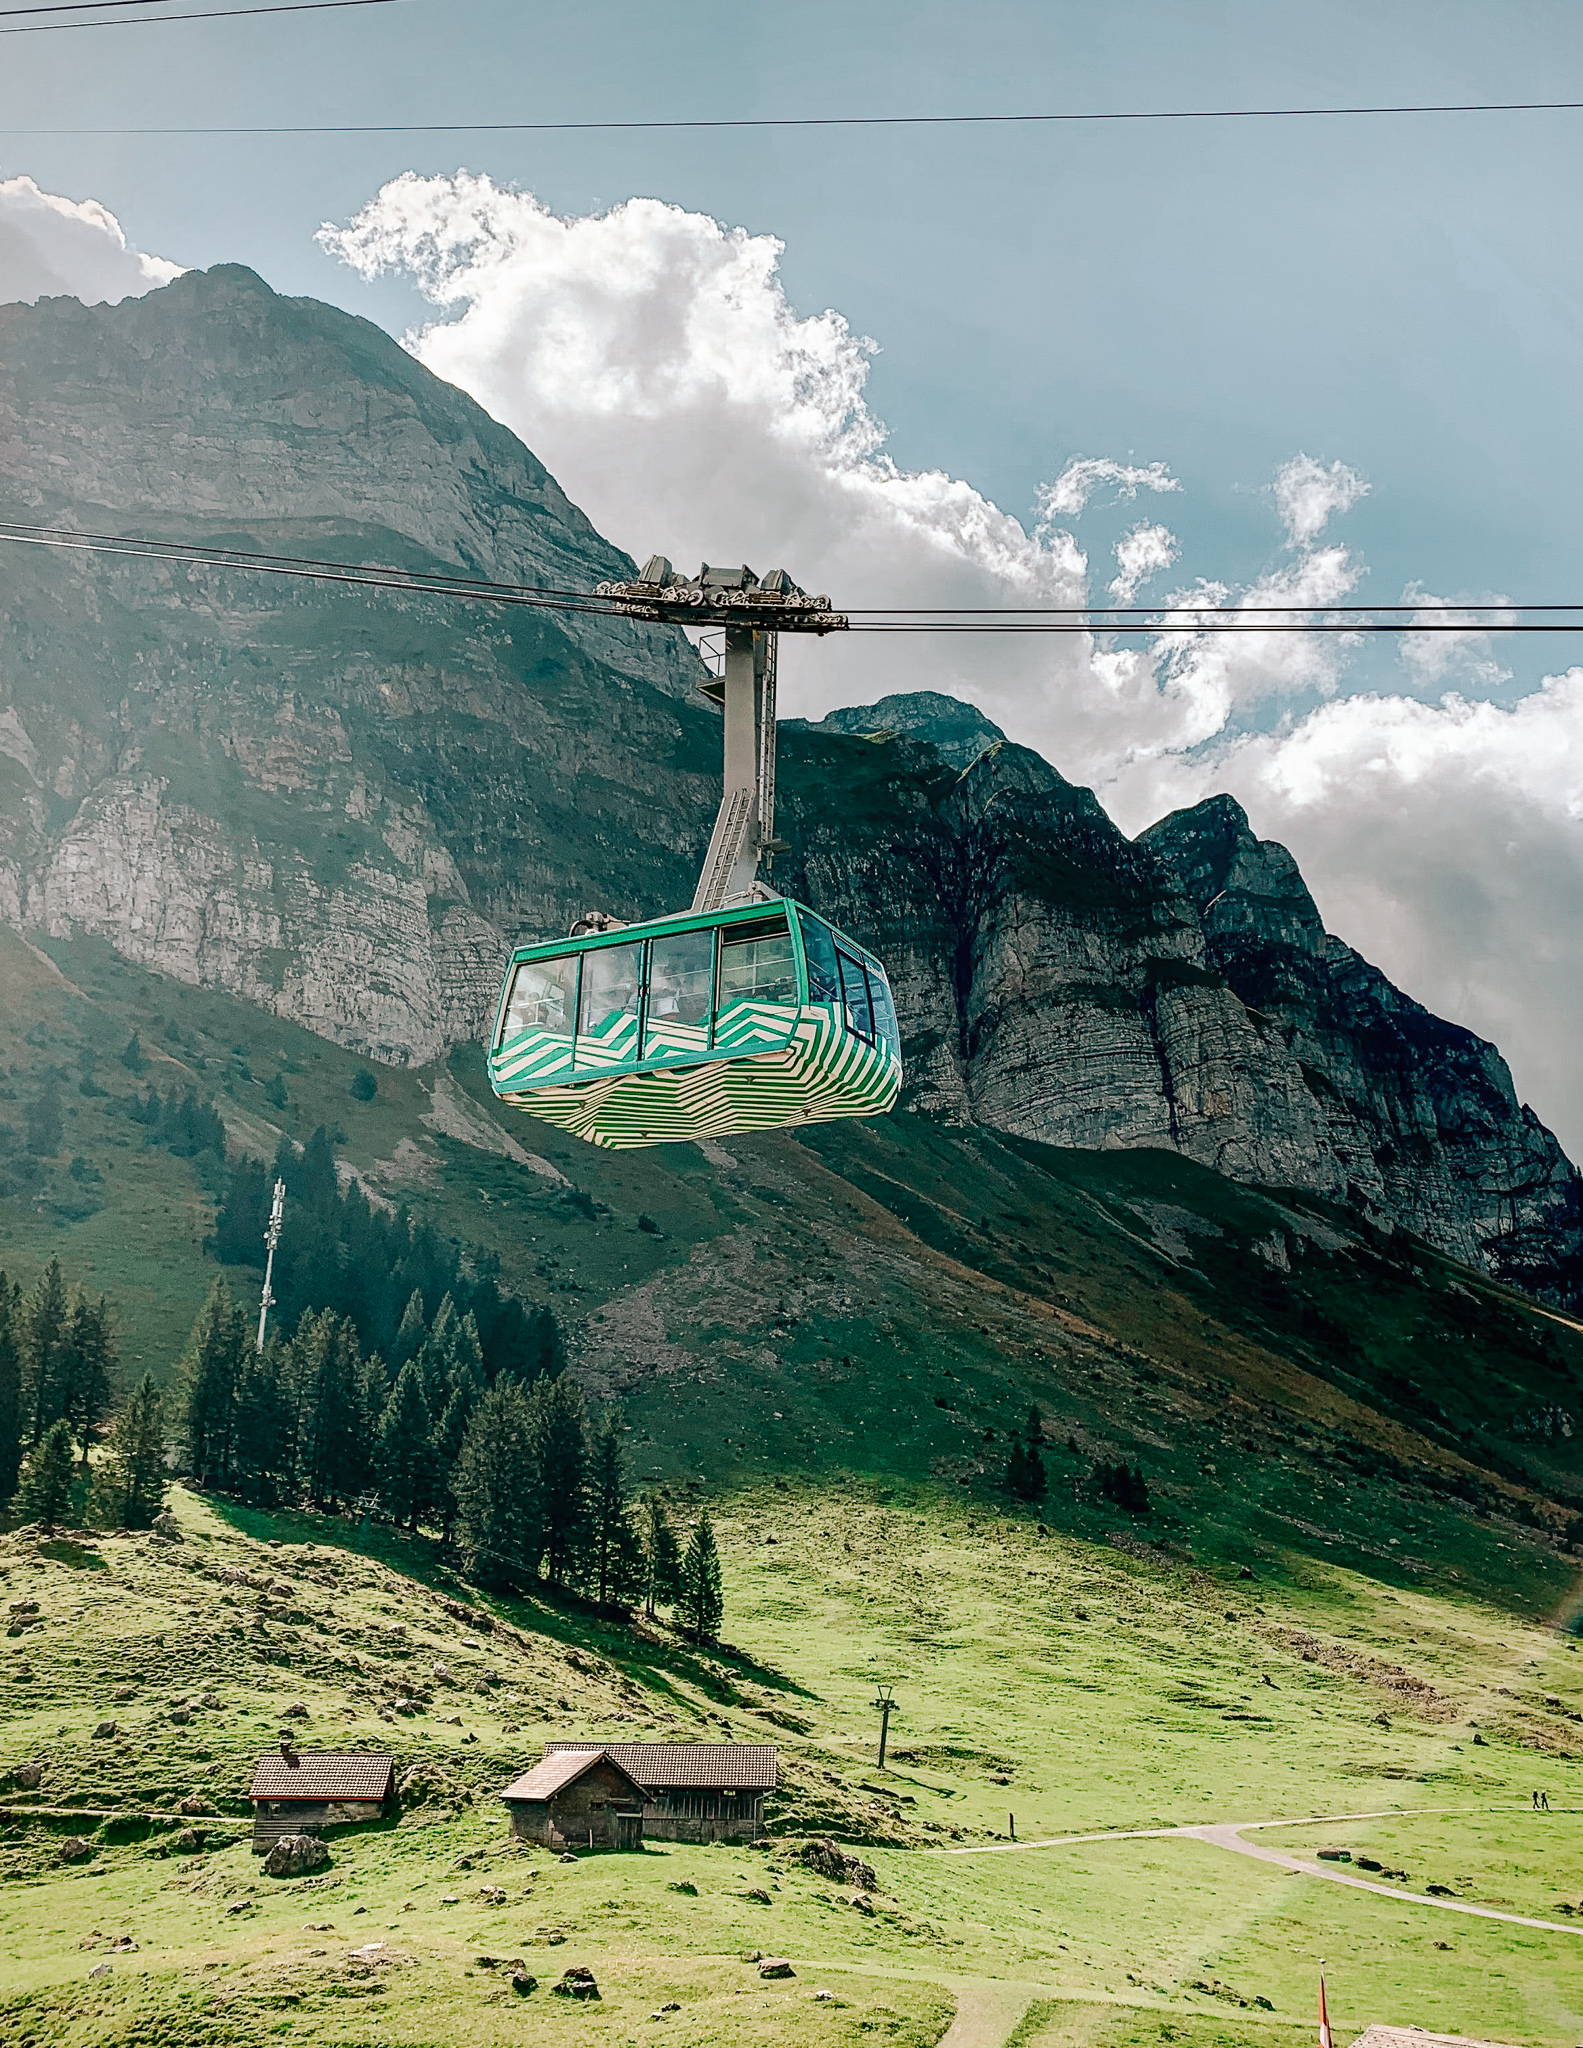 A green cablecar in appenzell switzerland